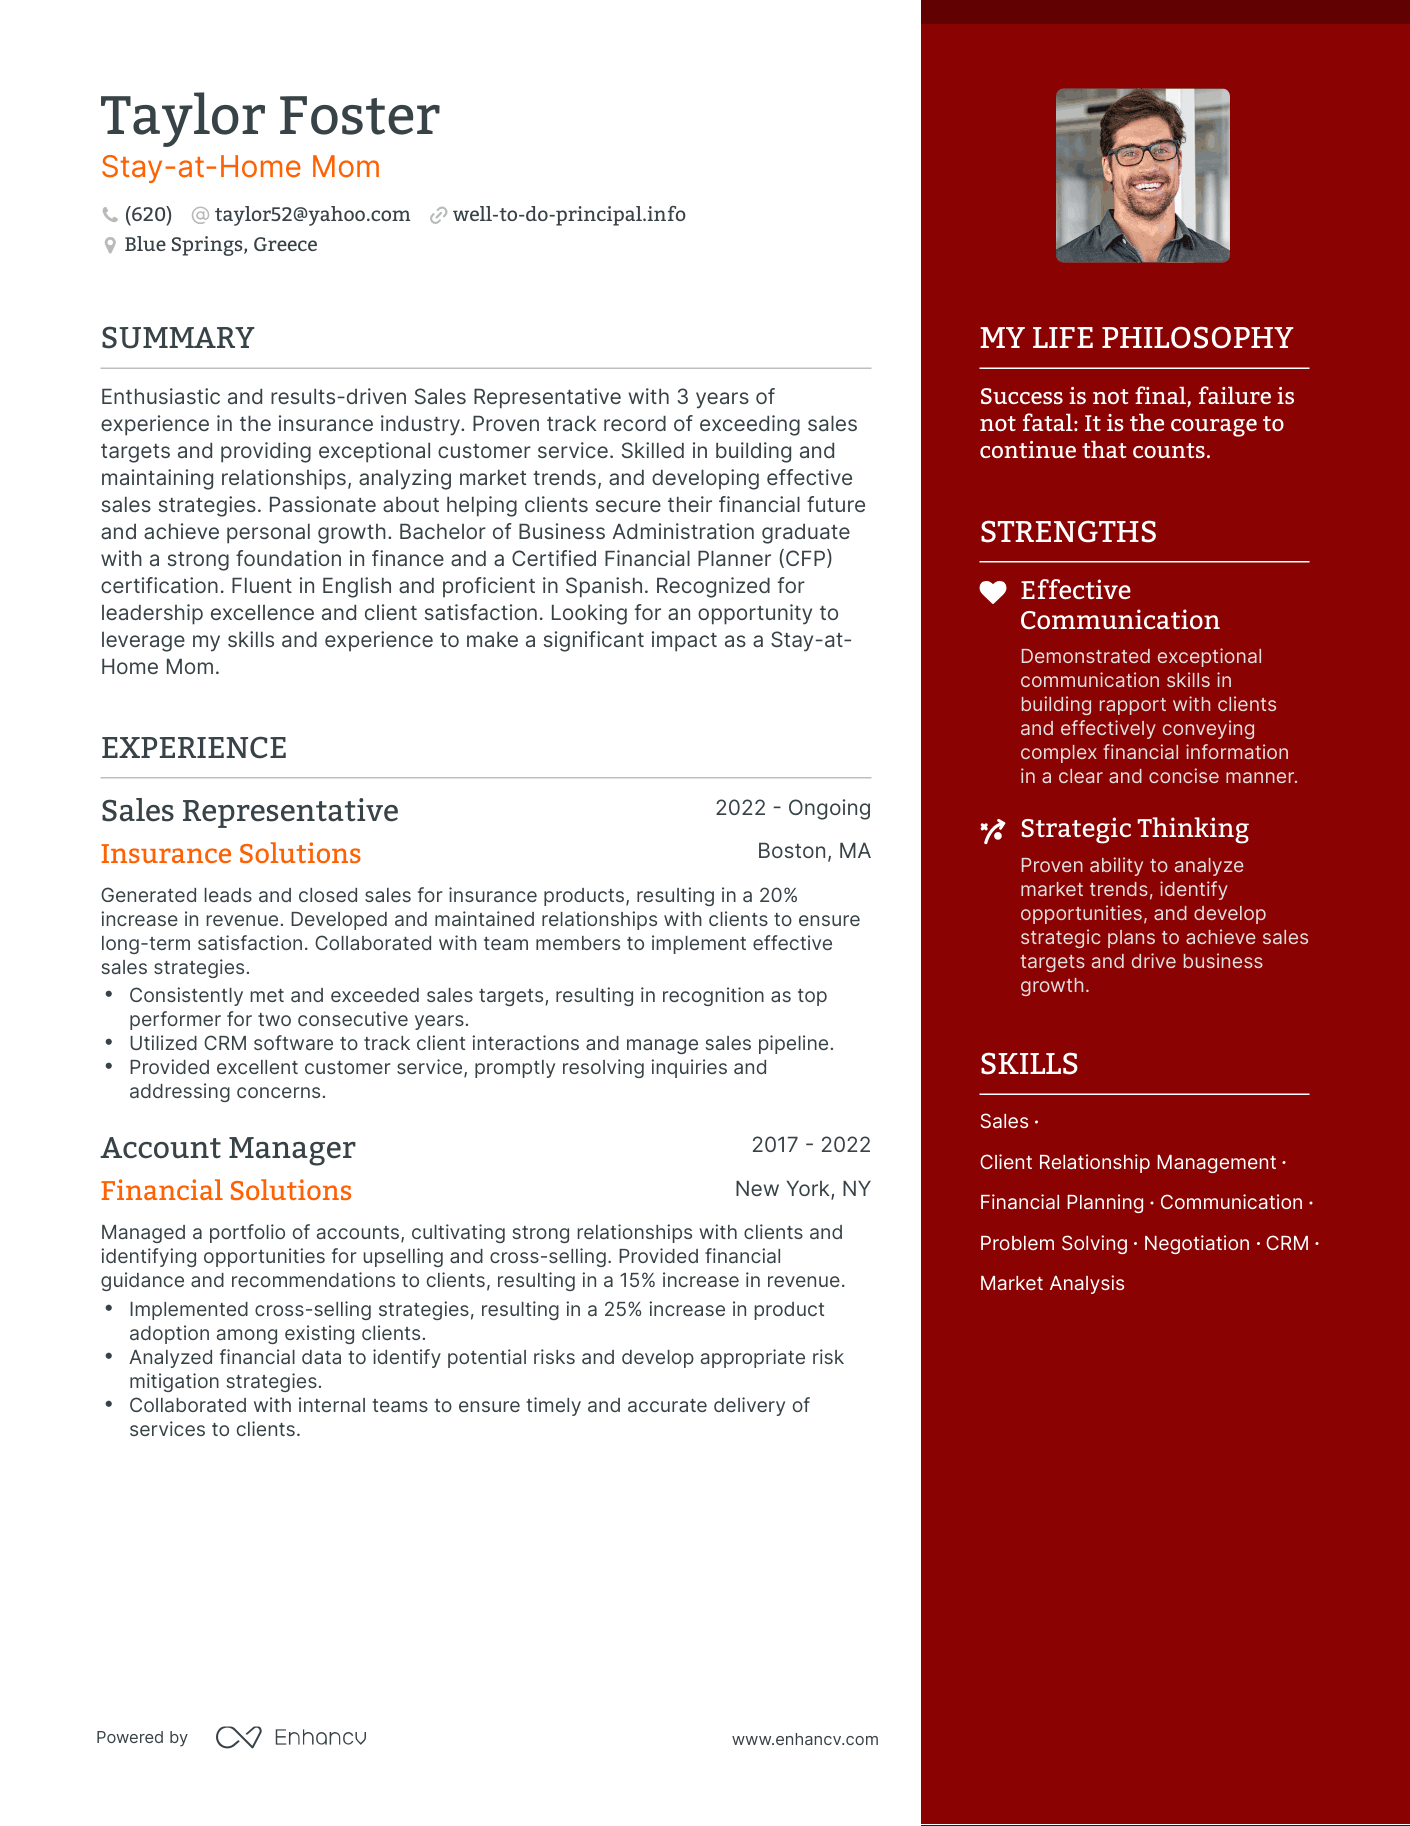 Stay-at-Home Mom resume example